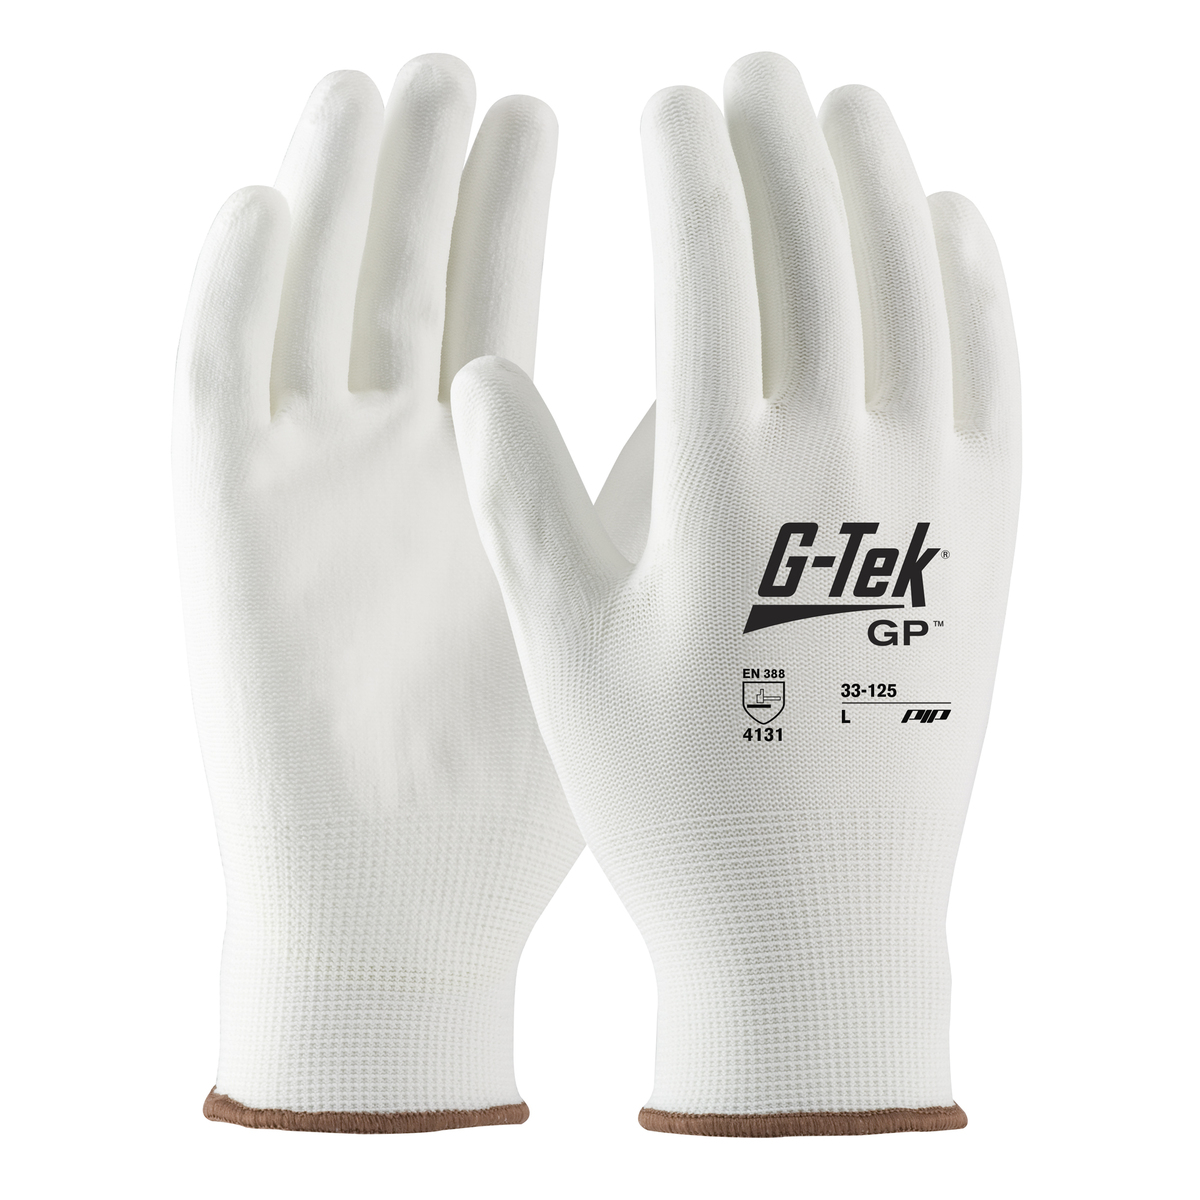 PIP® Large G-Tek® GP™ 13 Gauge White Polyurethane Palm And Finger Coated Work Gloves With Nylon Liner And Continuous Knit Wrist